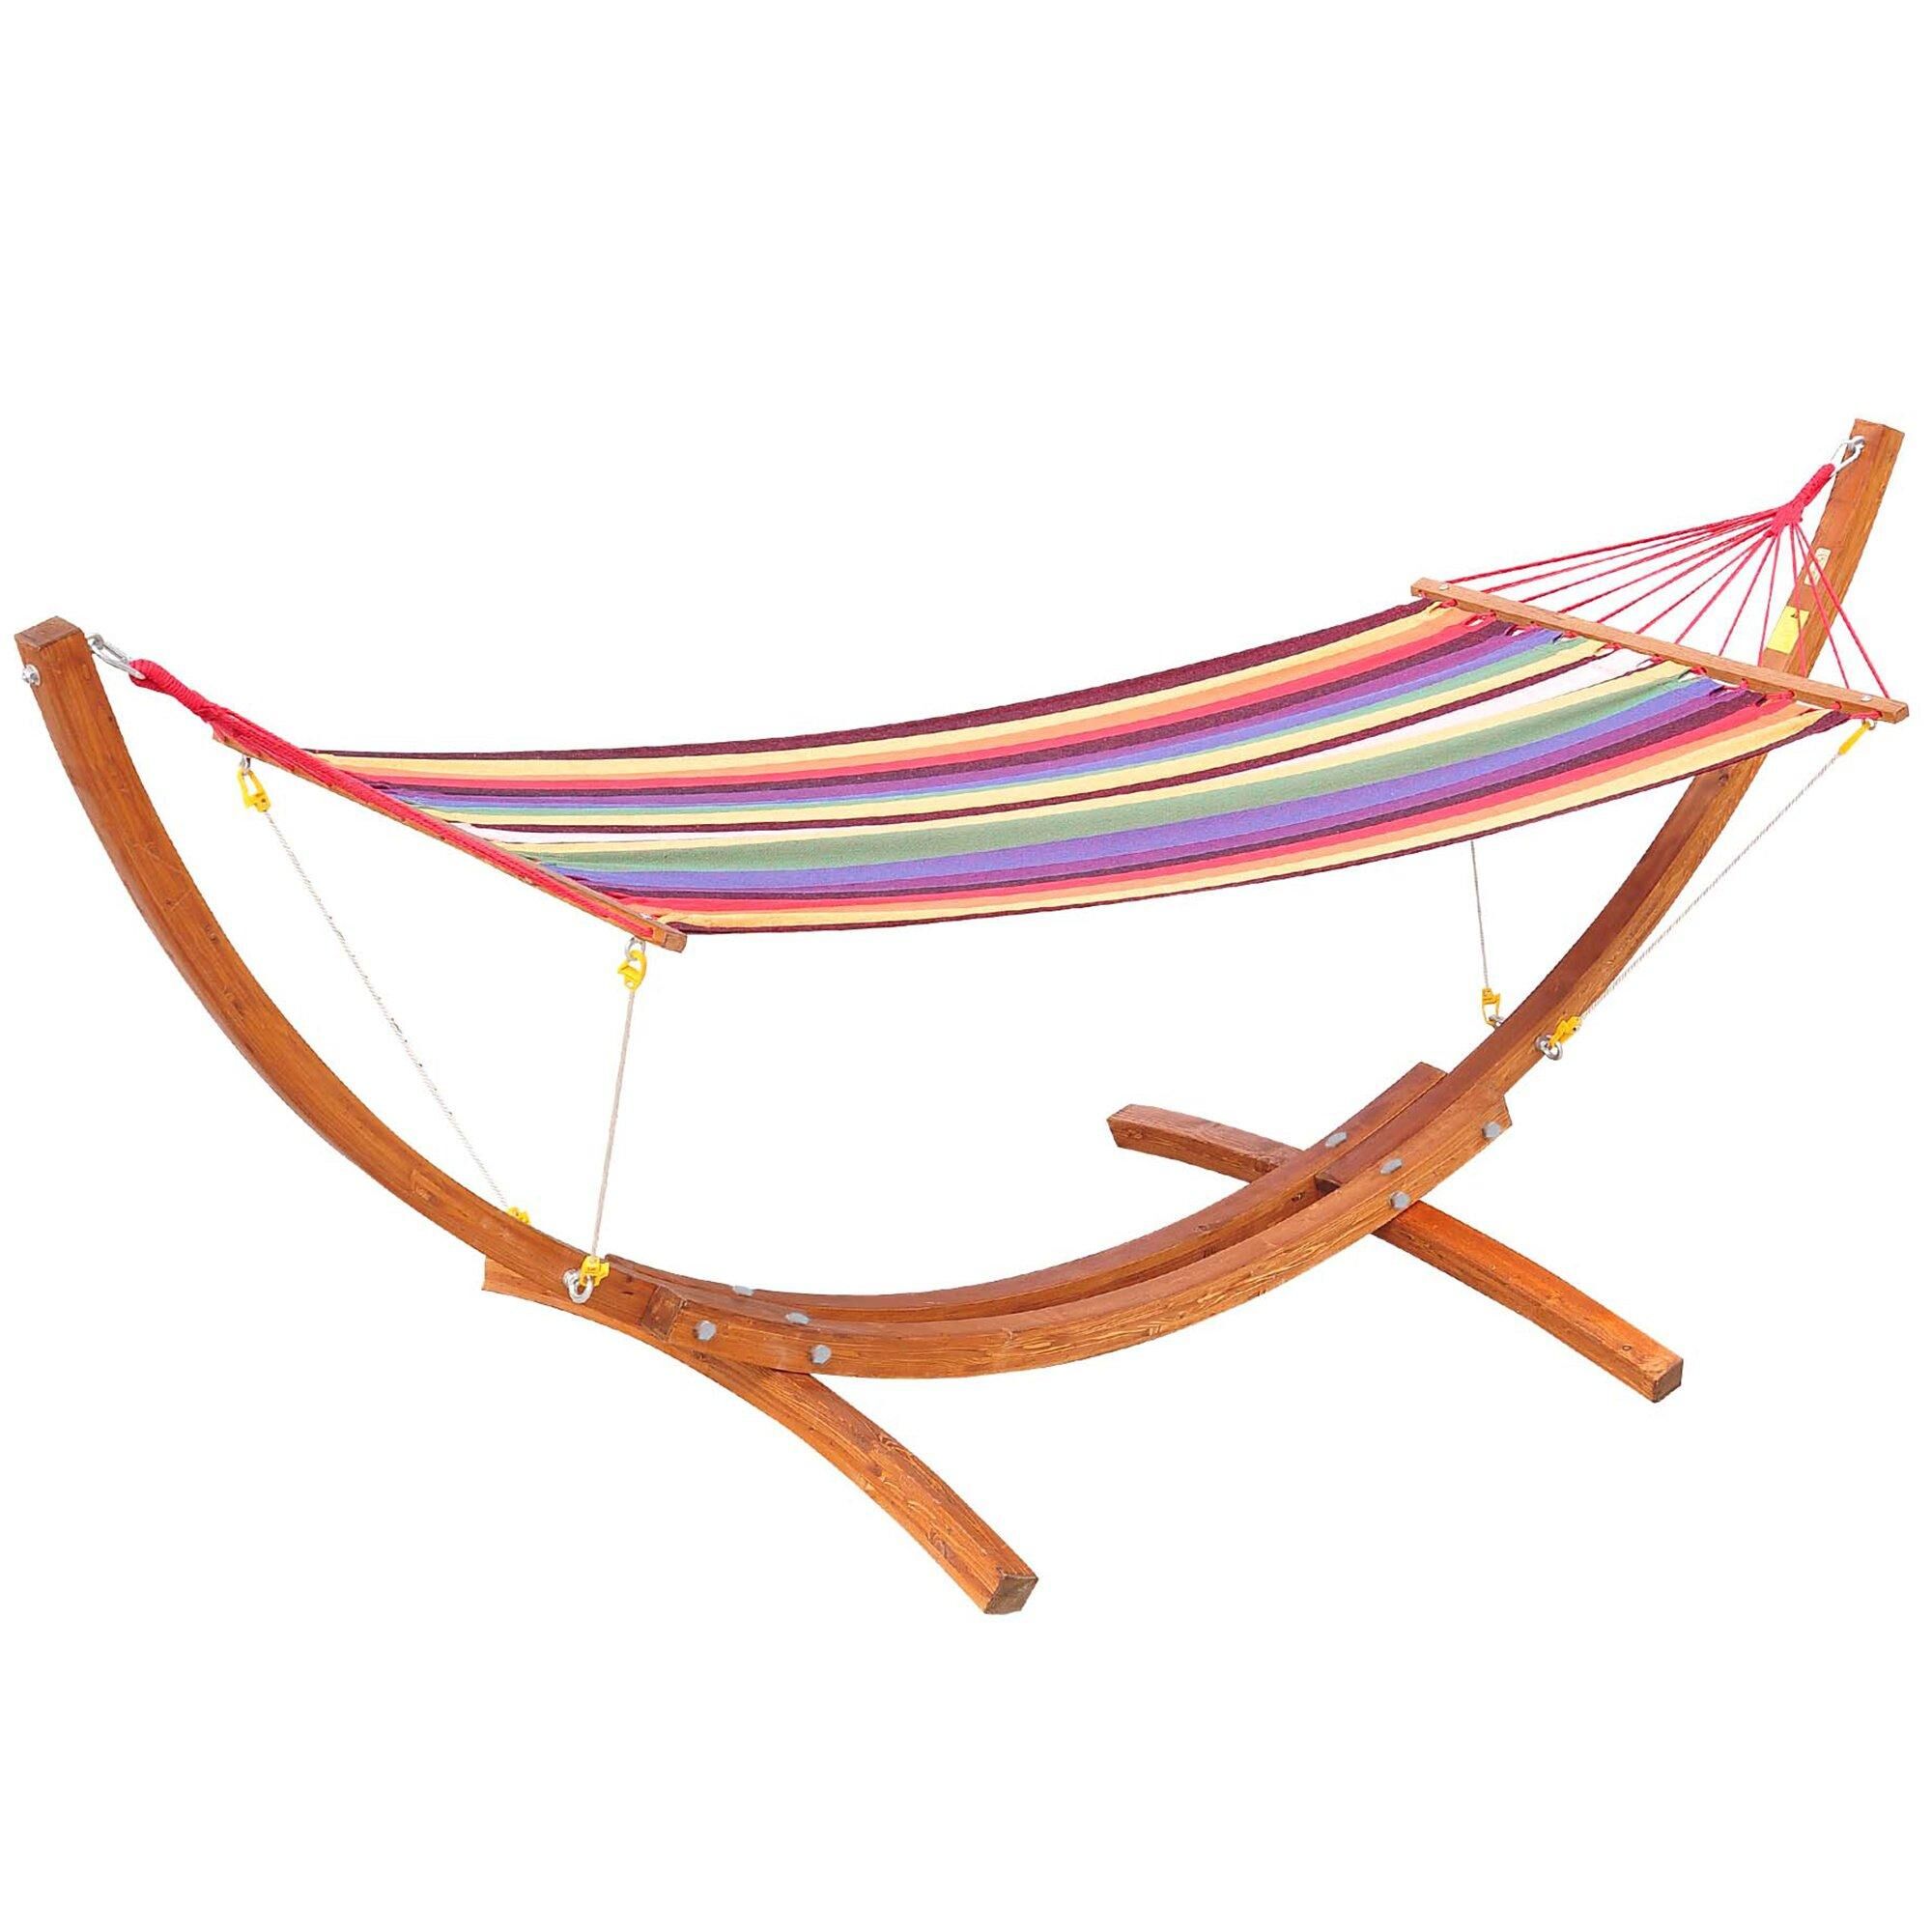 Outsunny Garden Outdoor Patio Wooden Frame Hammock Stand Sun Swing Bed Seat